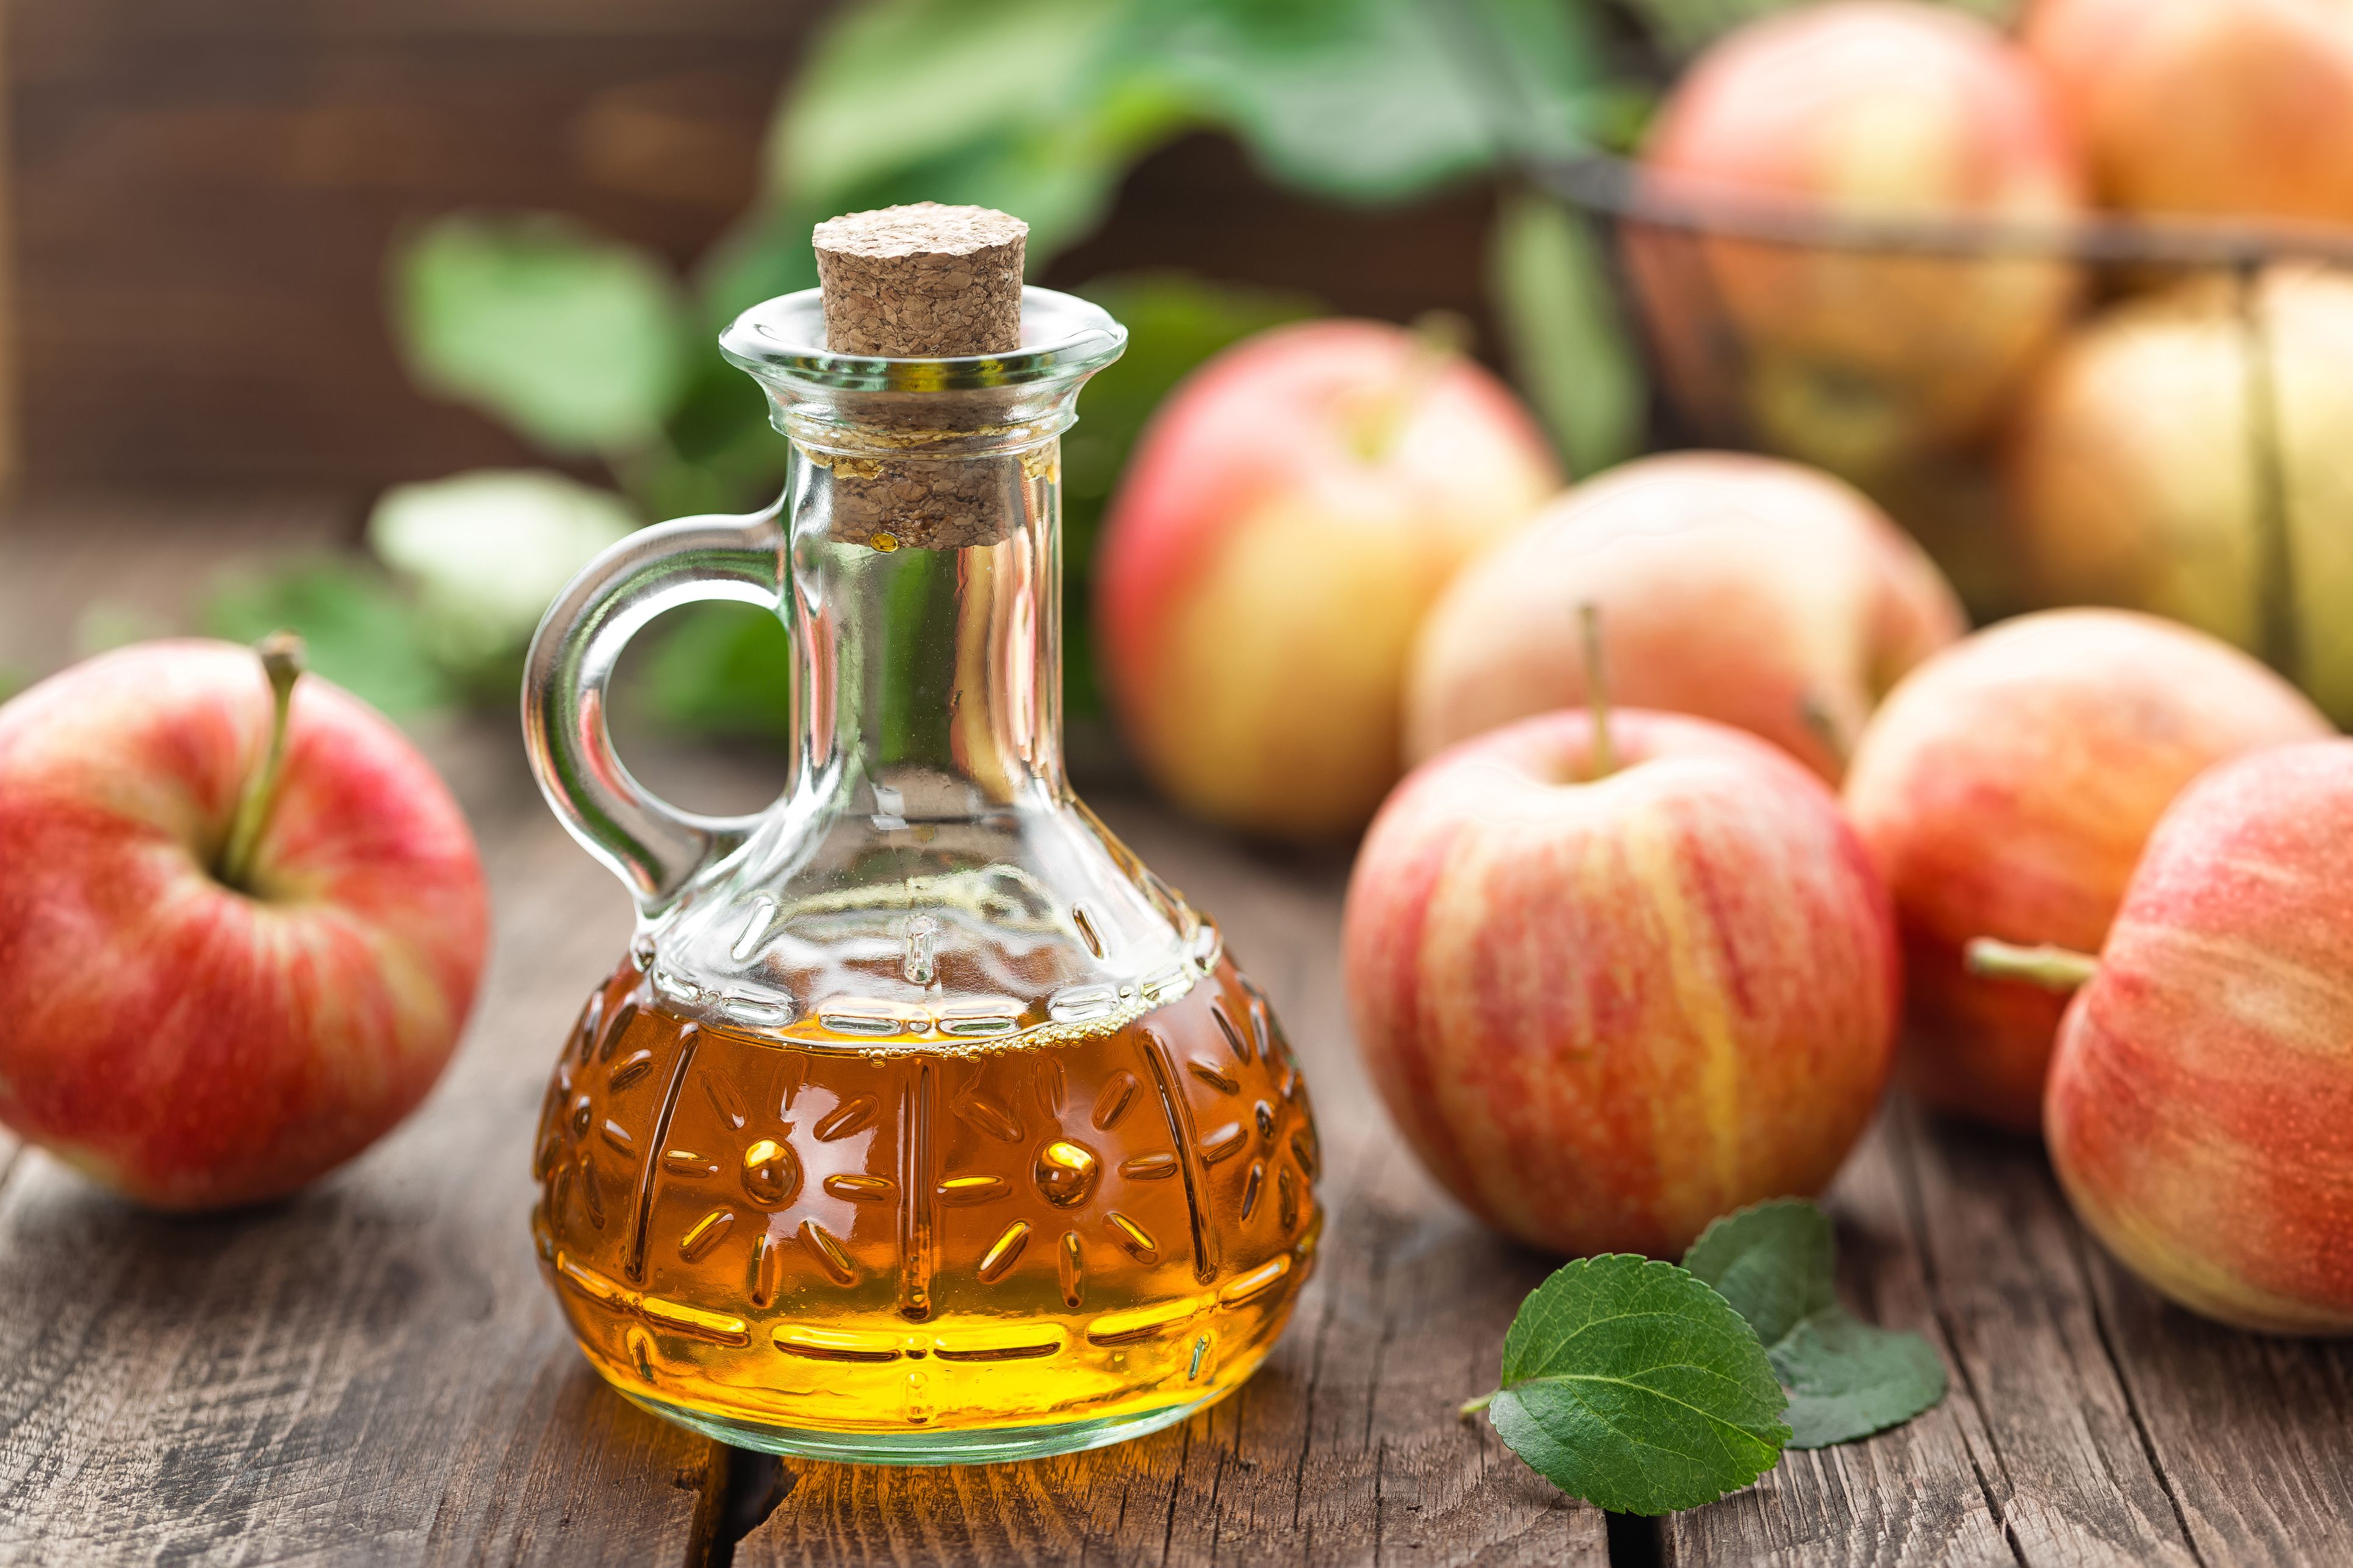 How to Get Rid of Armpit Odor With Apple Cider Vinegar?